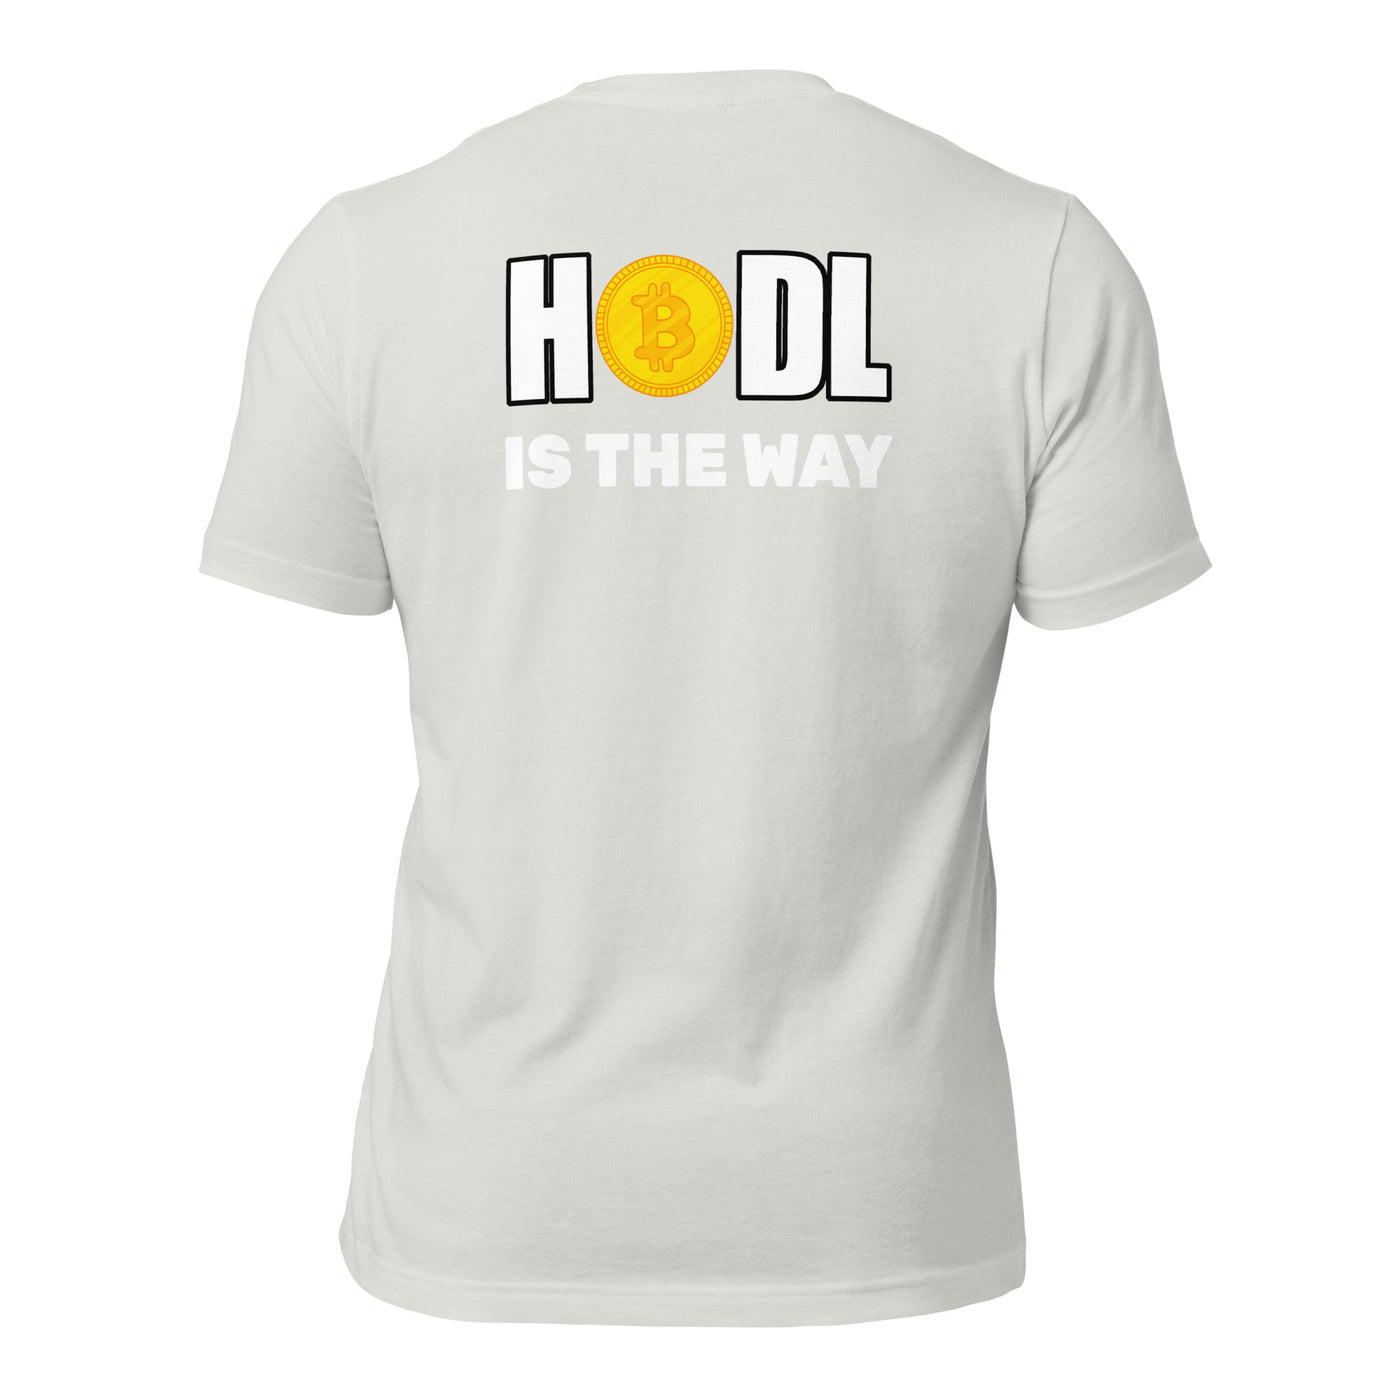 Hodl is the way - Unisex t-shirt (back print)